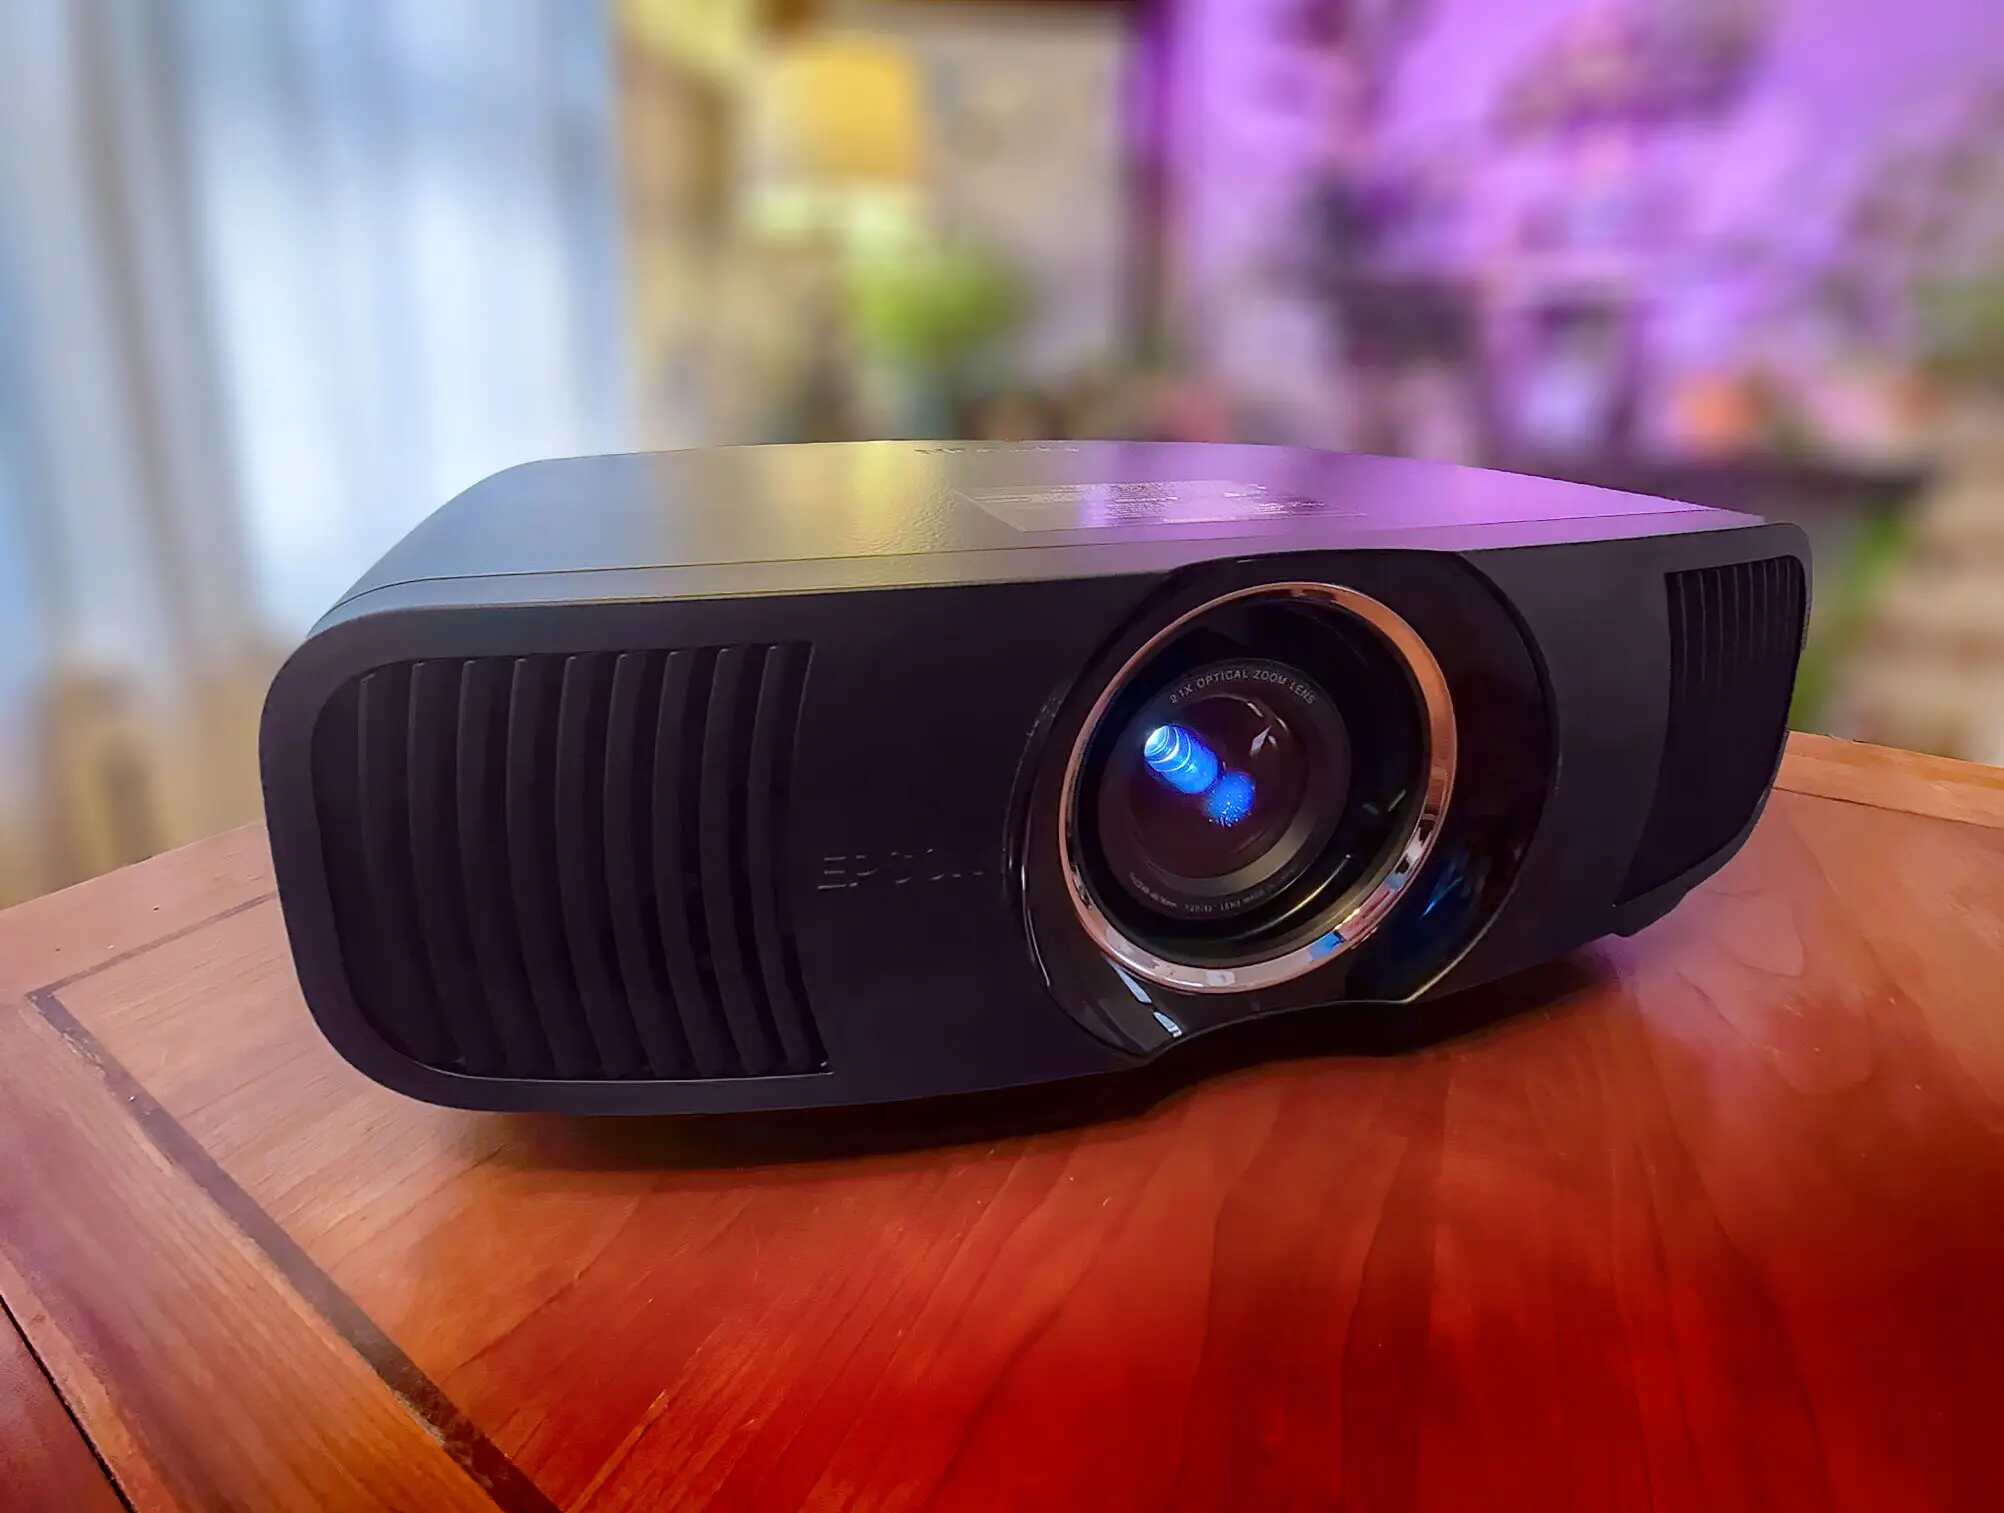 How To Play Video On Epson Projector